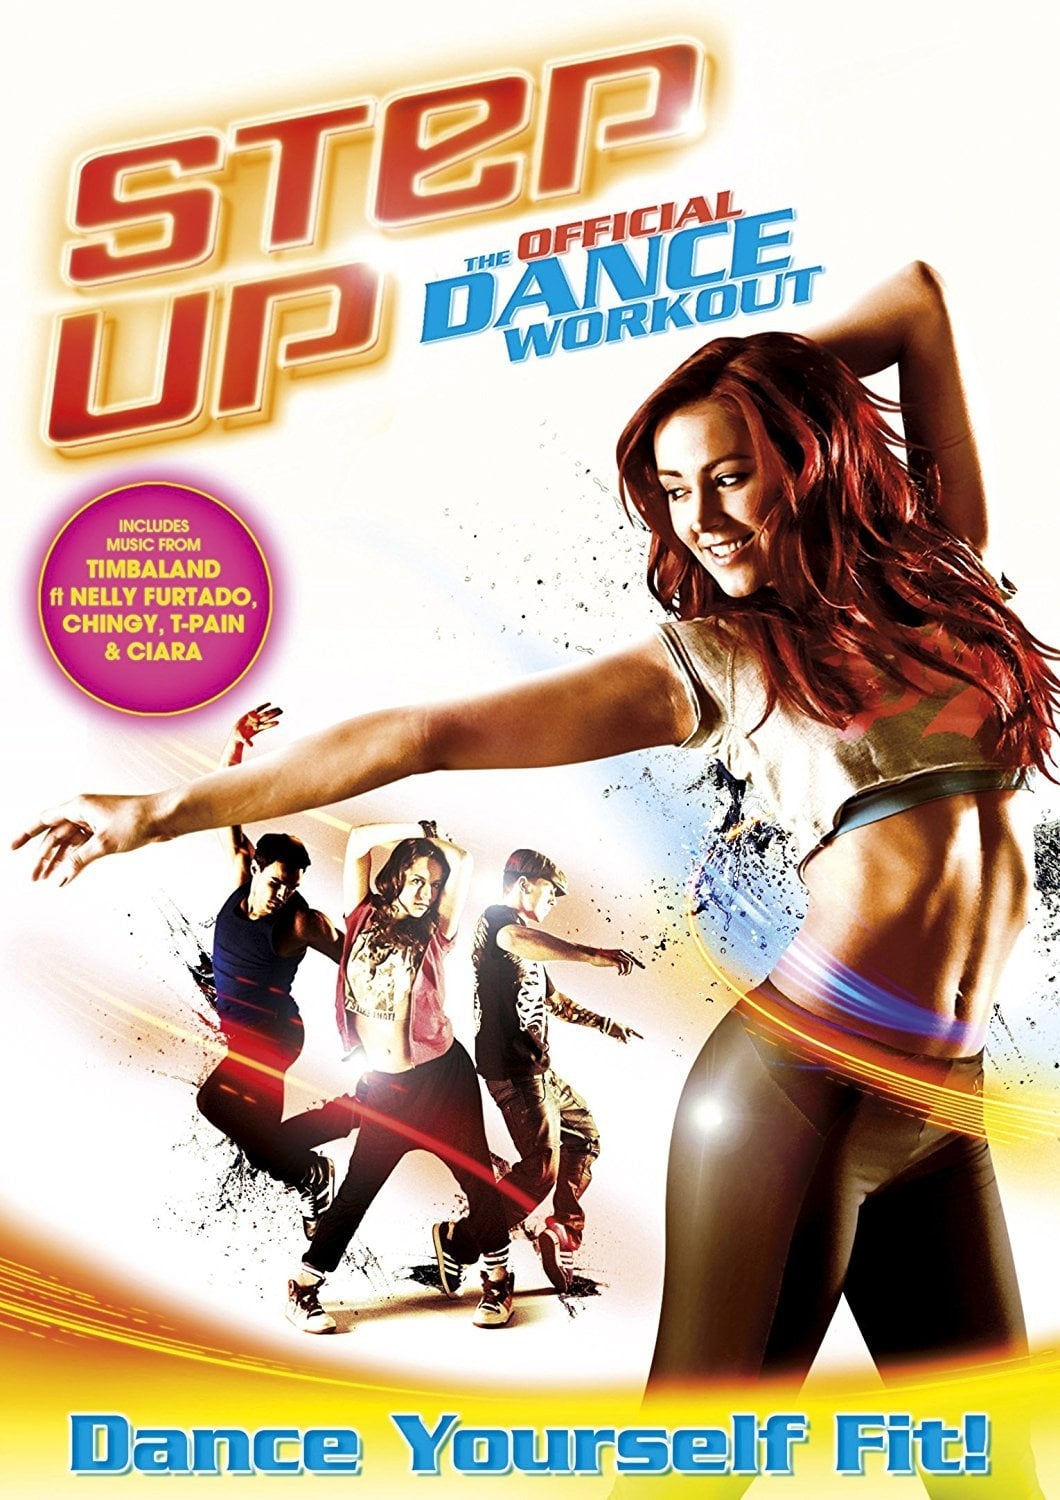 Step Up: The Official Dance Workout